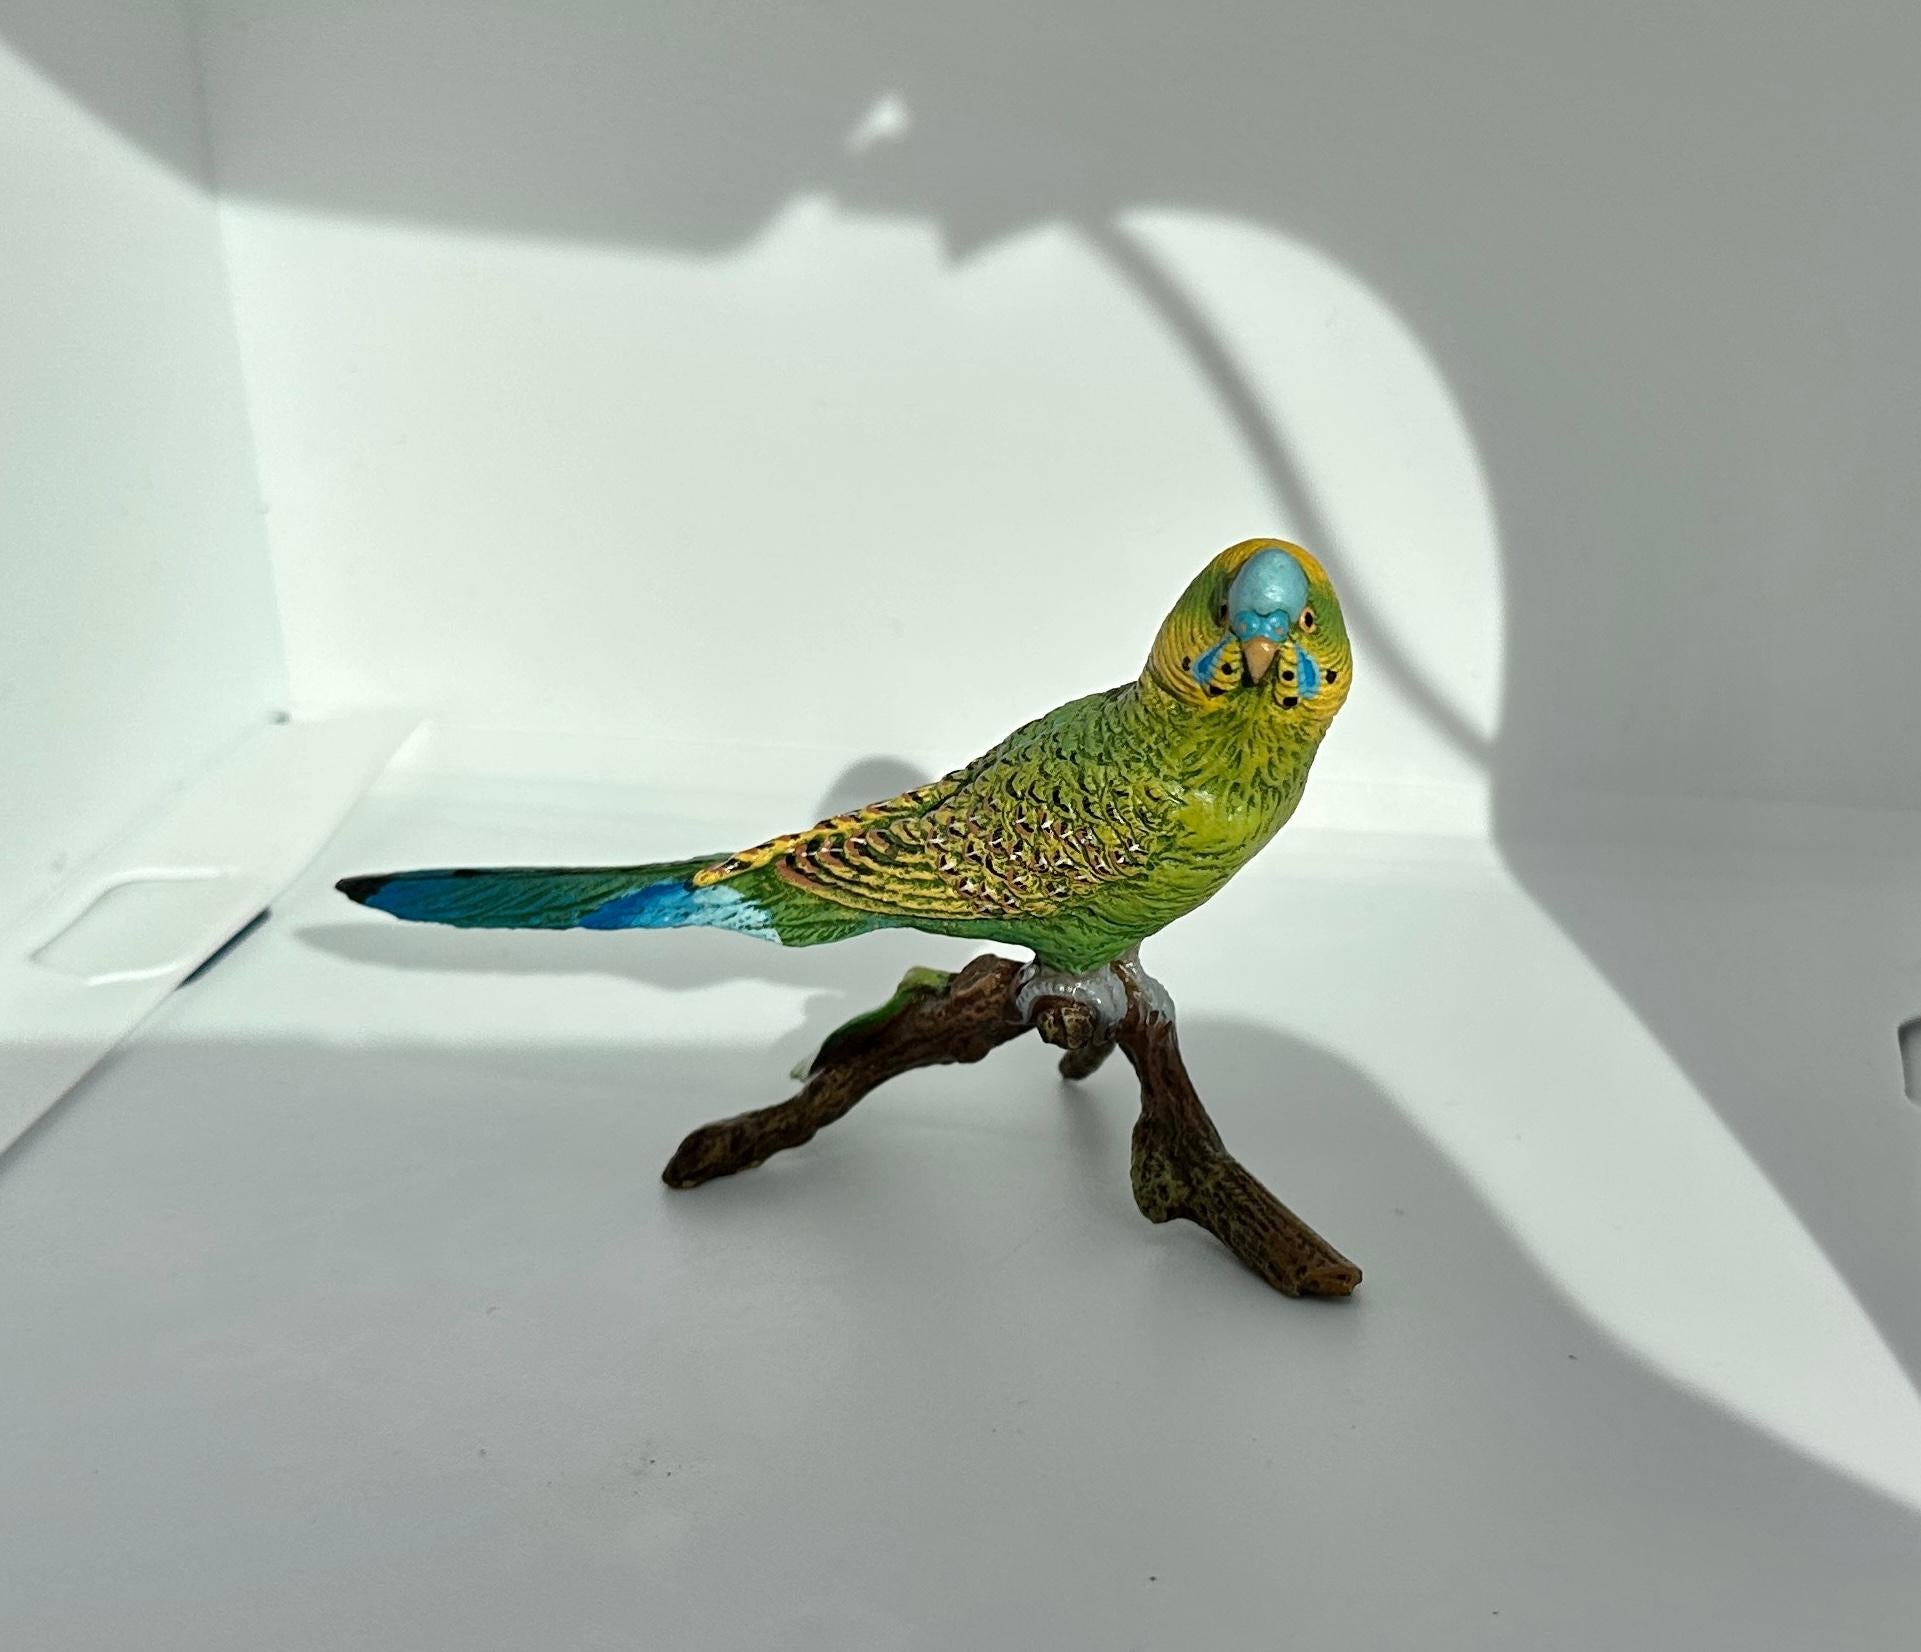 THIS IS A SUPERB AUSTRIAN VIENNA BRONZE OF A PARAKEET BIRD ON A BRANCH SIGNED WITH THE BERGMAN MARK.
This wonderful antique Austrian Vienna Bronze (Bronze de Vienne, Wiener Bronze, Cold Painted Bronze) is so charming with its yellow-green and blue